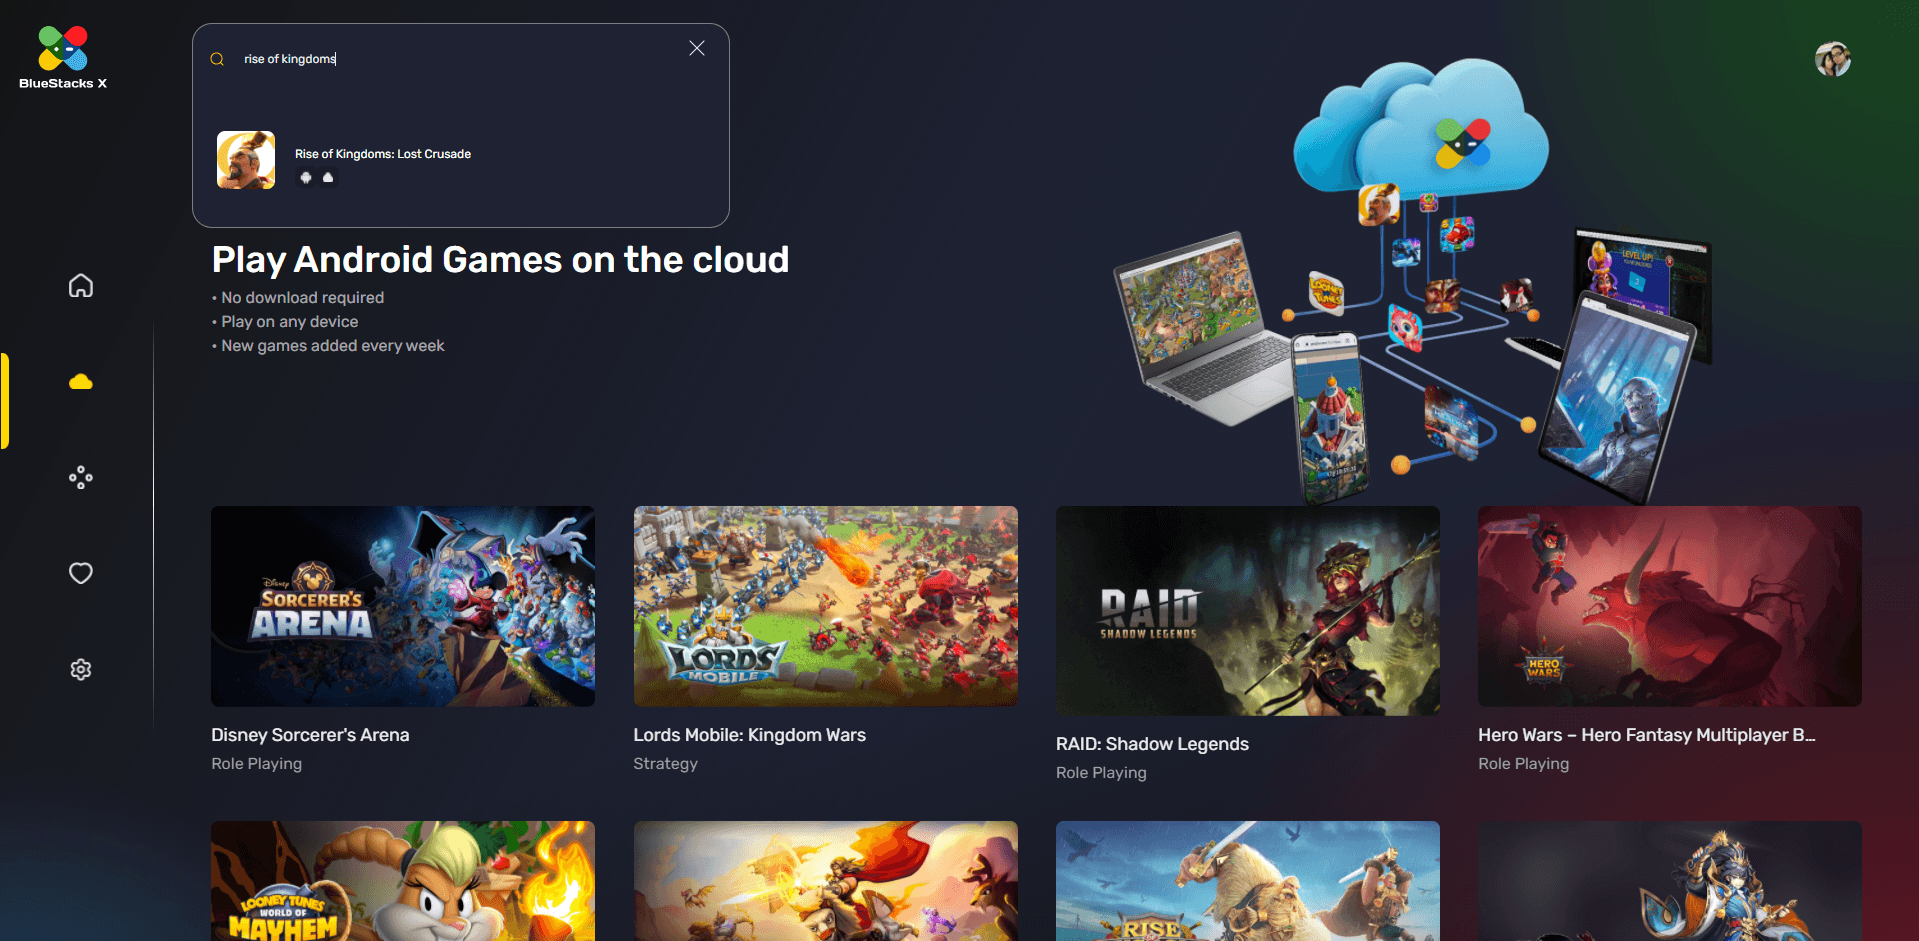 How to Play Rise of Kingdoms on the Cloud with BlueStacks X